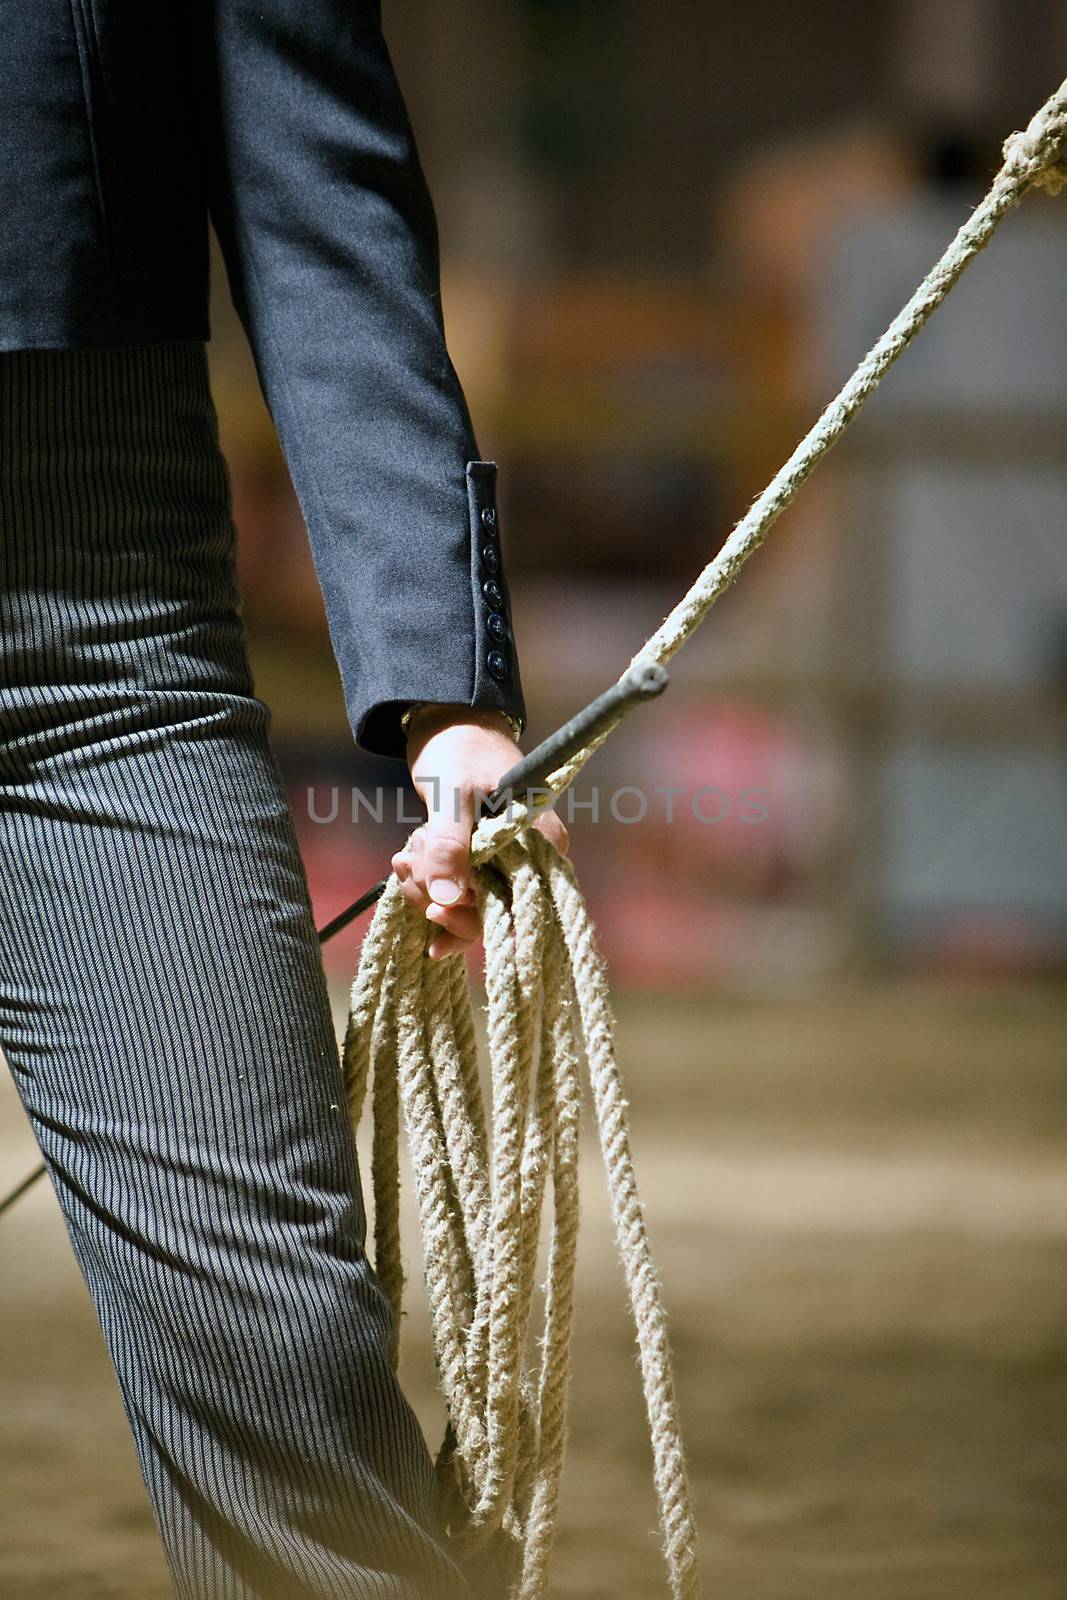 Closeup of rider holding rope during an equestrian event, equestrian test of morphology to pure Spanish horses, Spain